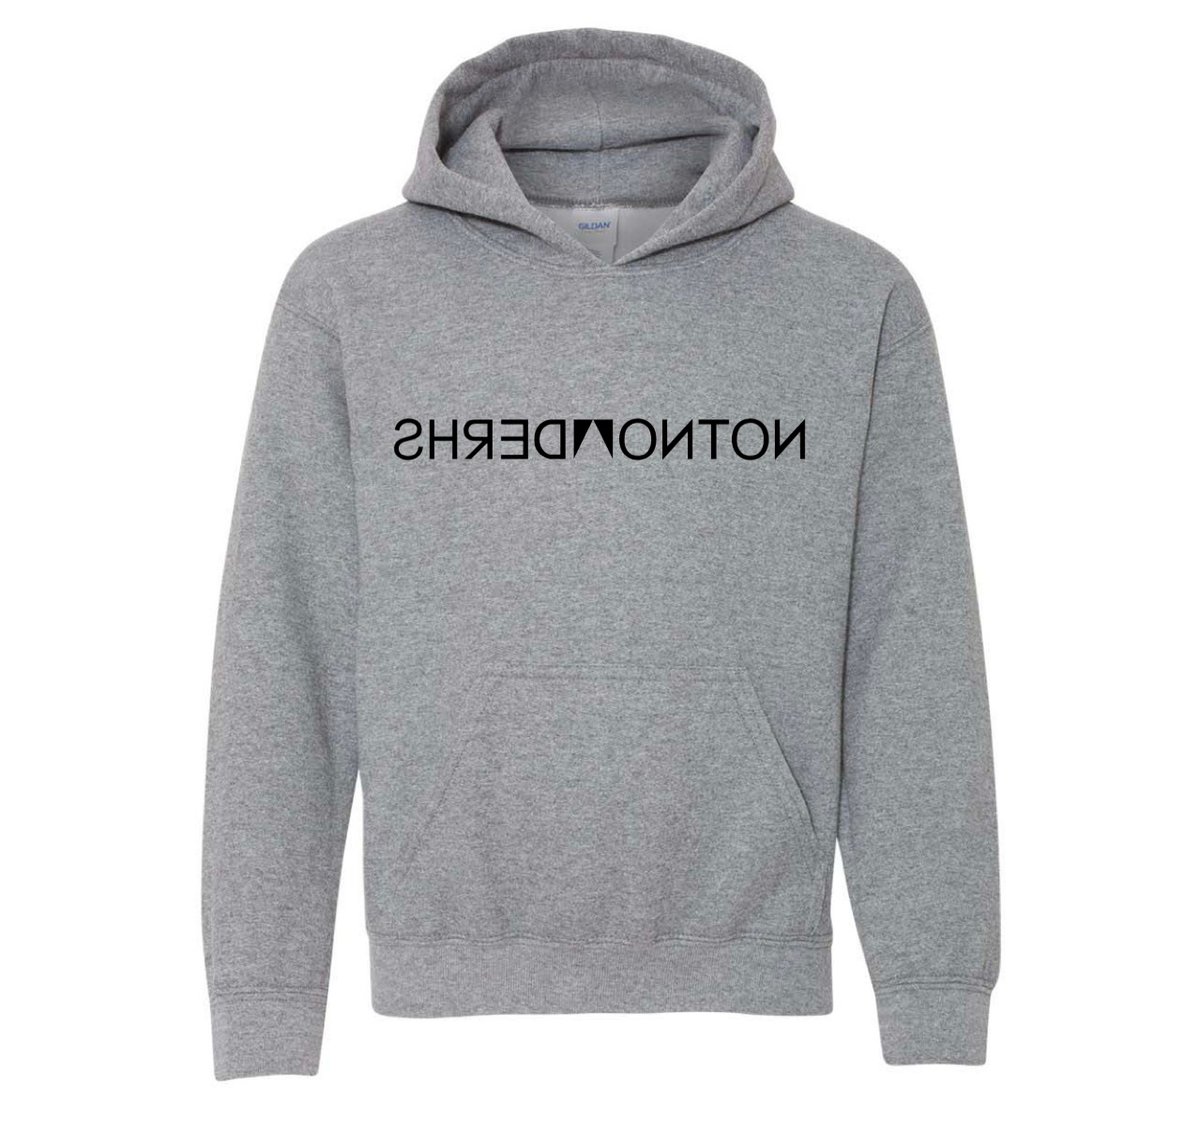 Image of SHREDGAME - UNISEX YOUTH HOODY - PREORDER